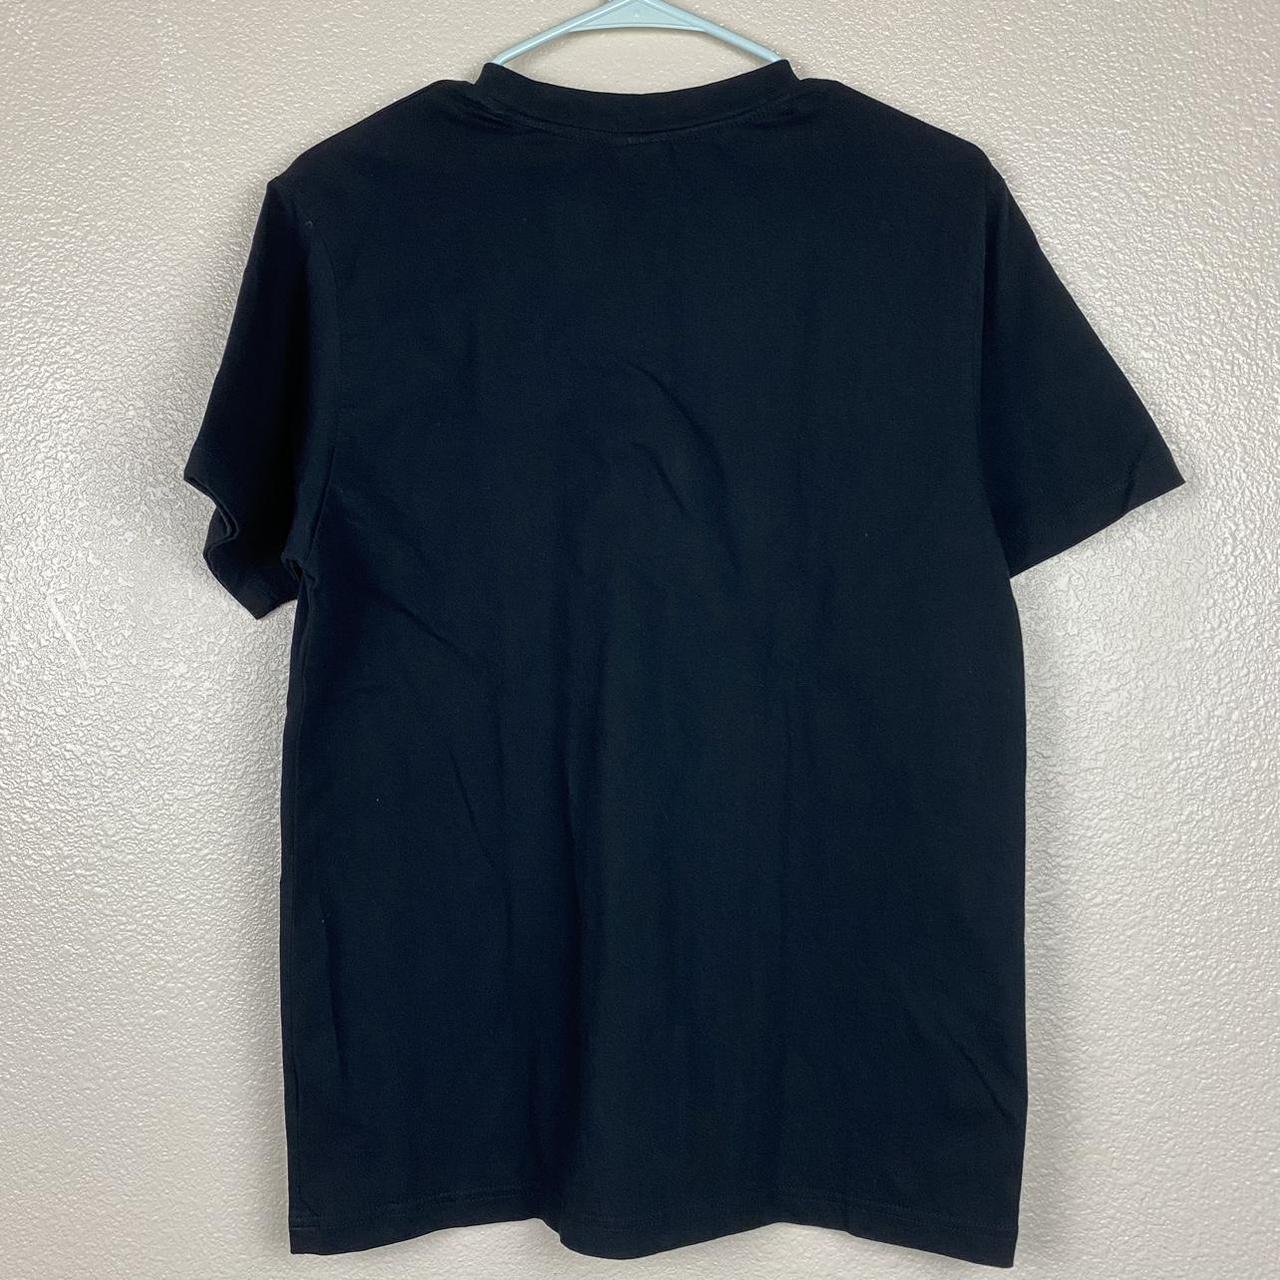 Teddy Fresh T-Shirt with embroidered writing and... - Depop